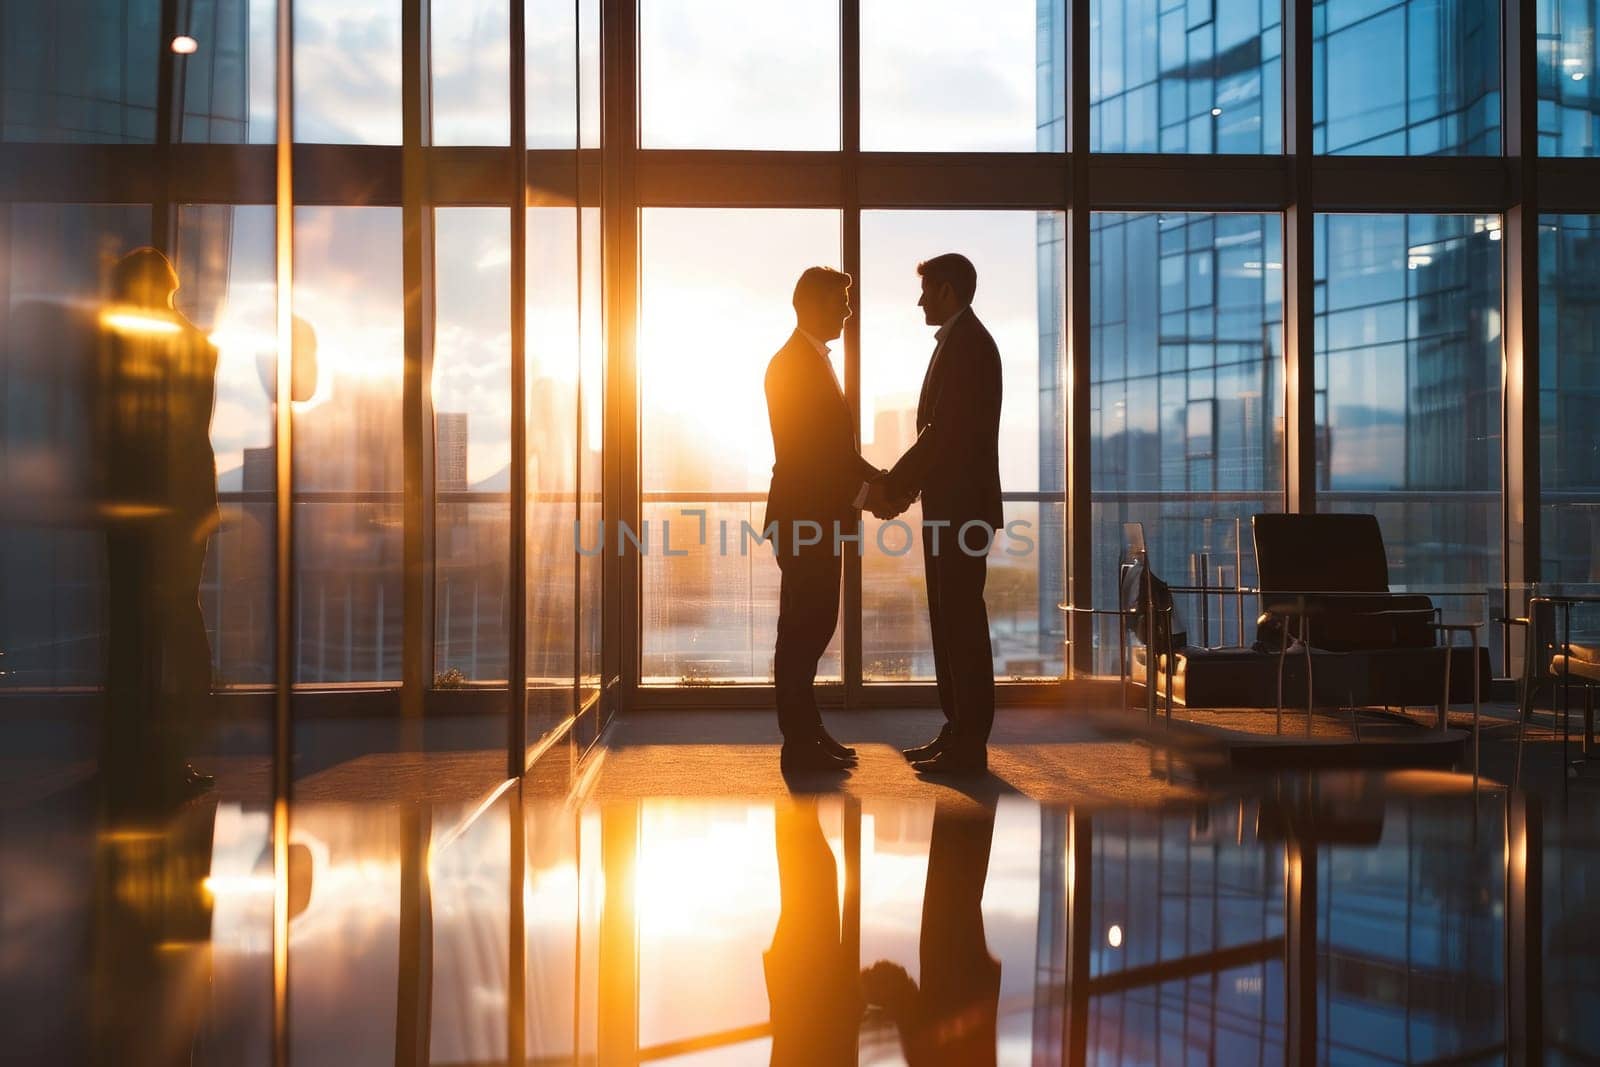 Handshake, Silhouettes of two businessmen shaking hands after the deal is done in office.